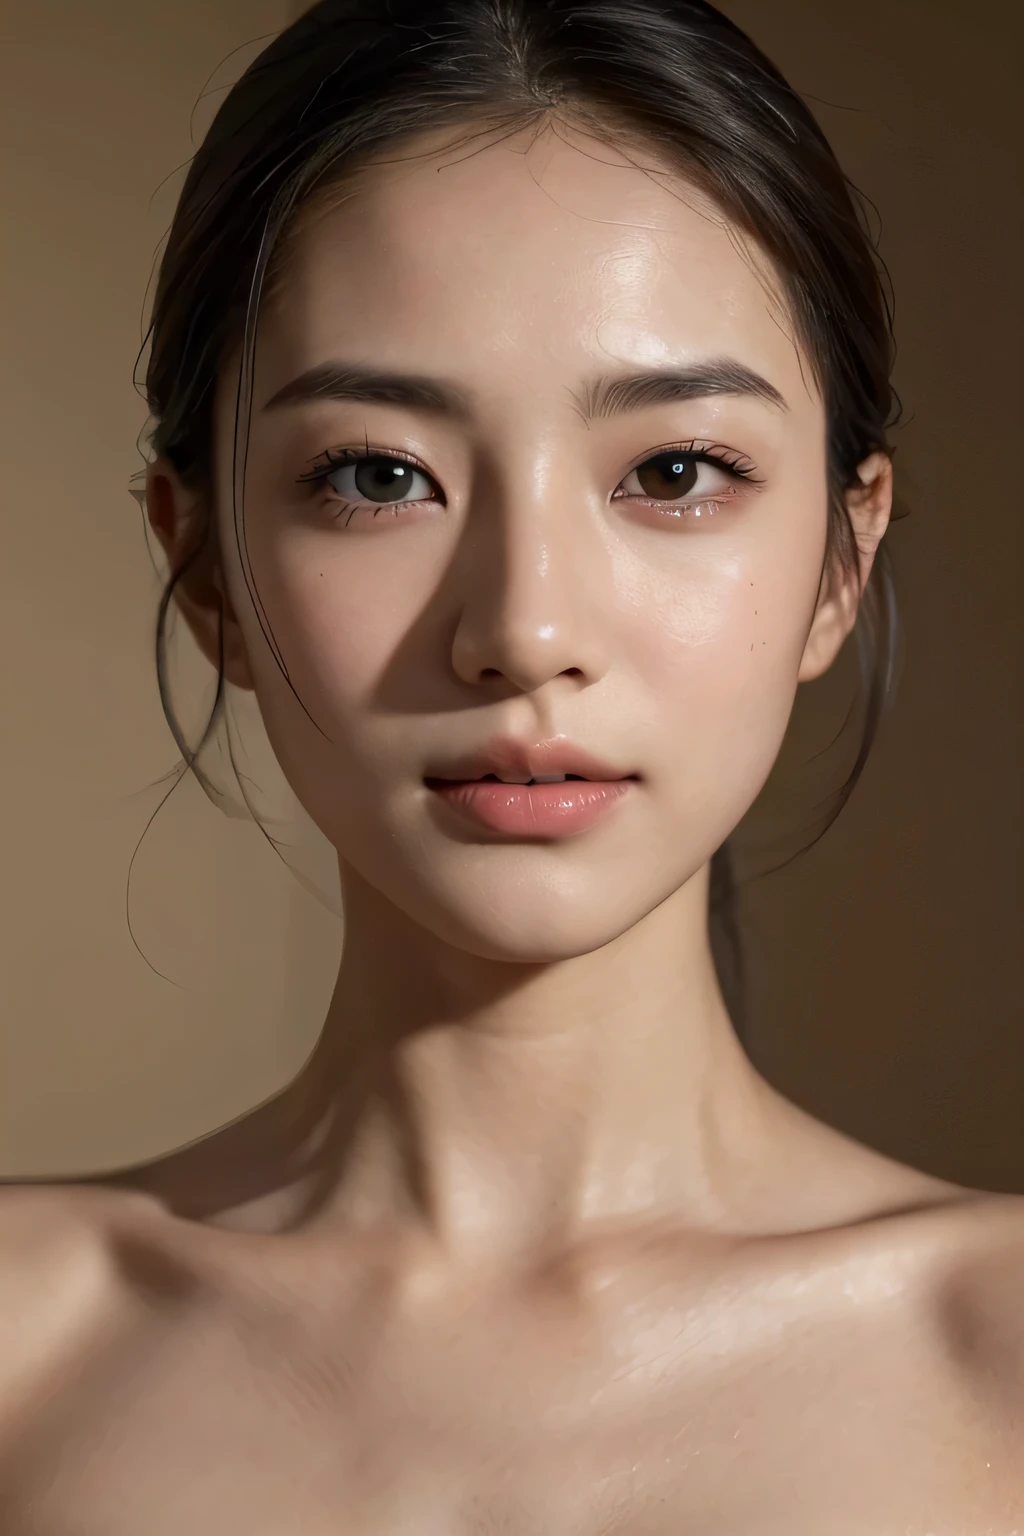 (Enhances the beauty of skin texture:1.1), (Enhances the beauty of skin texture:1.1), highest quality、masterpiece, ultra high resolution、(Photoreal:1.4)、RAW photo、1 girl、shiny skin, dramatic lighting, RAW photo, table top:1.3, ultra high resolution:1.0, sharp focus:1.2, beautiful woman with perfect figure:1.4, thin abs:1.2, Highly detailed face and skin texture, fine eyes, double eyelid, perfect facial balance, clean system, smile, Soft light in a beautiful studio, rim light, vivid details, surreal, Fine and beautiful skin, realistic skin, beautiful face, Beautiful woman, high solution face, soft texture, nude, close up of face, glowing skin, face of glory, crazy high resolution, glowing skin, shining face, luster, oily skin, oily face, close up of face, zoom on face, oily skin, oily face, 強いluster, beautiful hair, Kitagawa Keiko、Kuroki Meisa, Whitening skin, porcelain skin, smooth skin